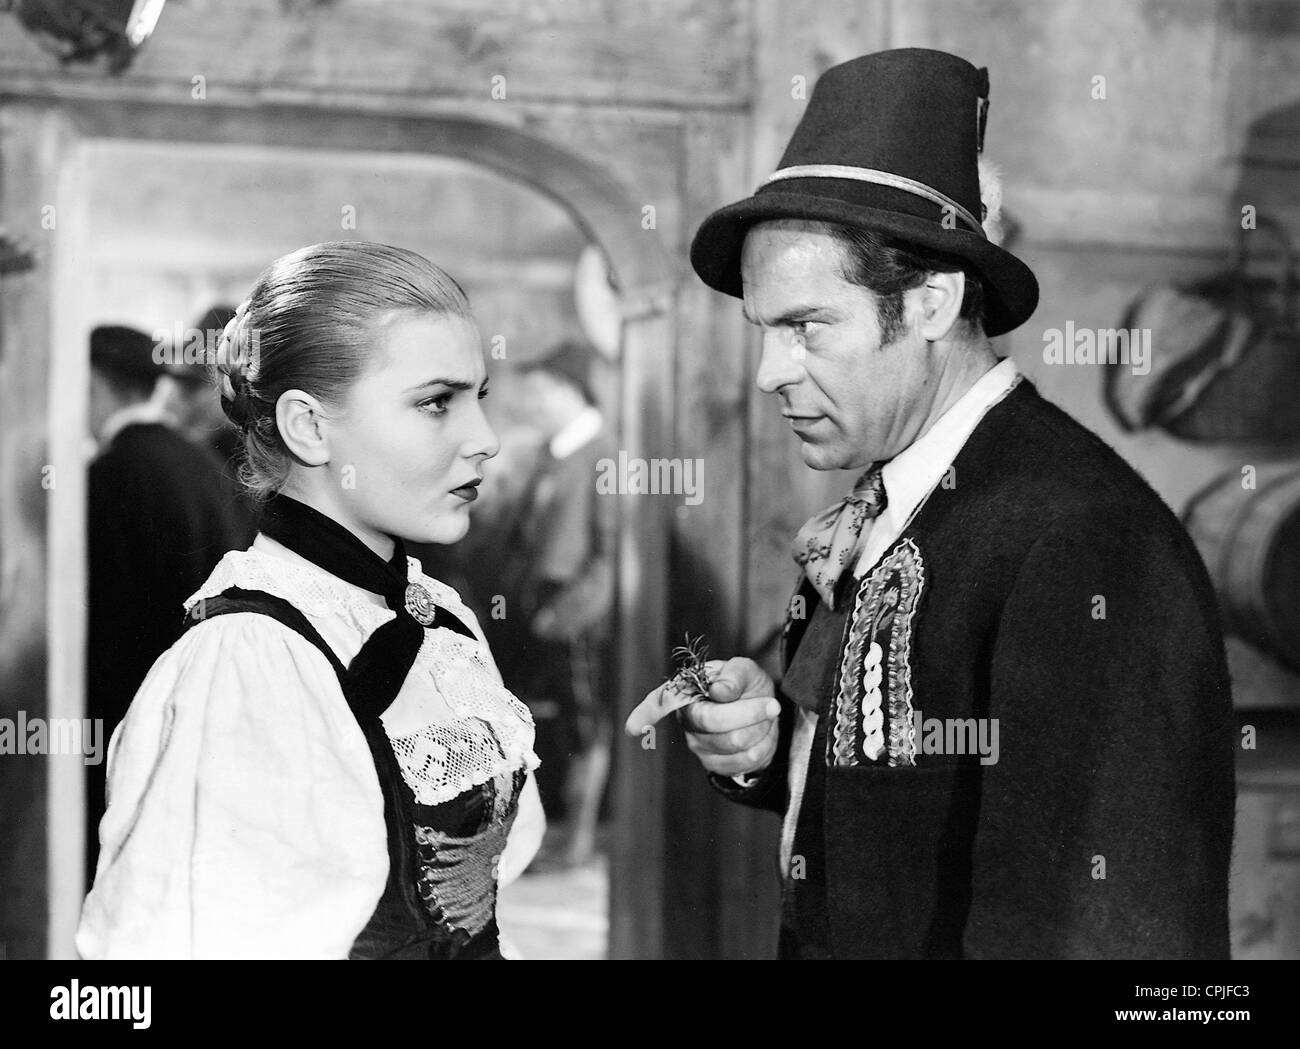 Winnie Markus and Sepp Rist in 'Wally of the Vultures', 1940 Stock Photo